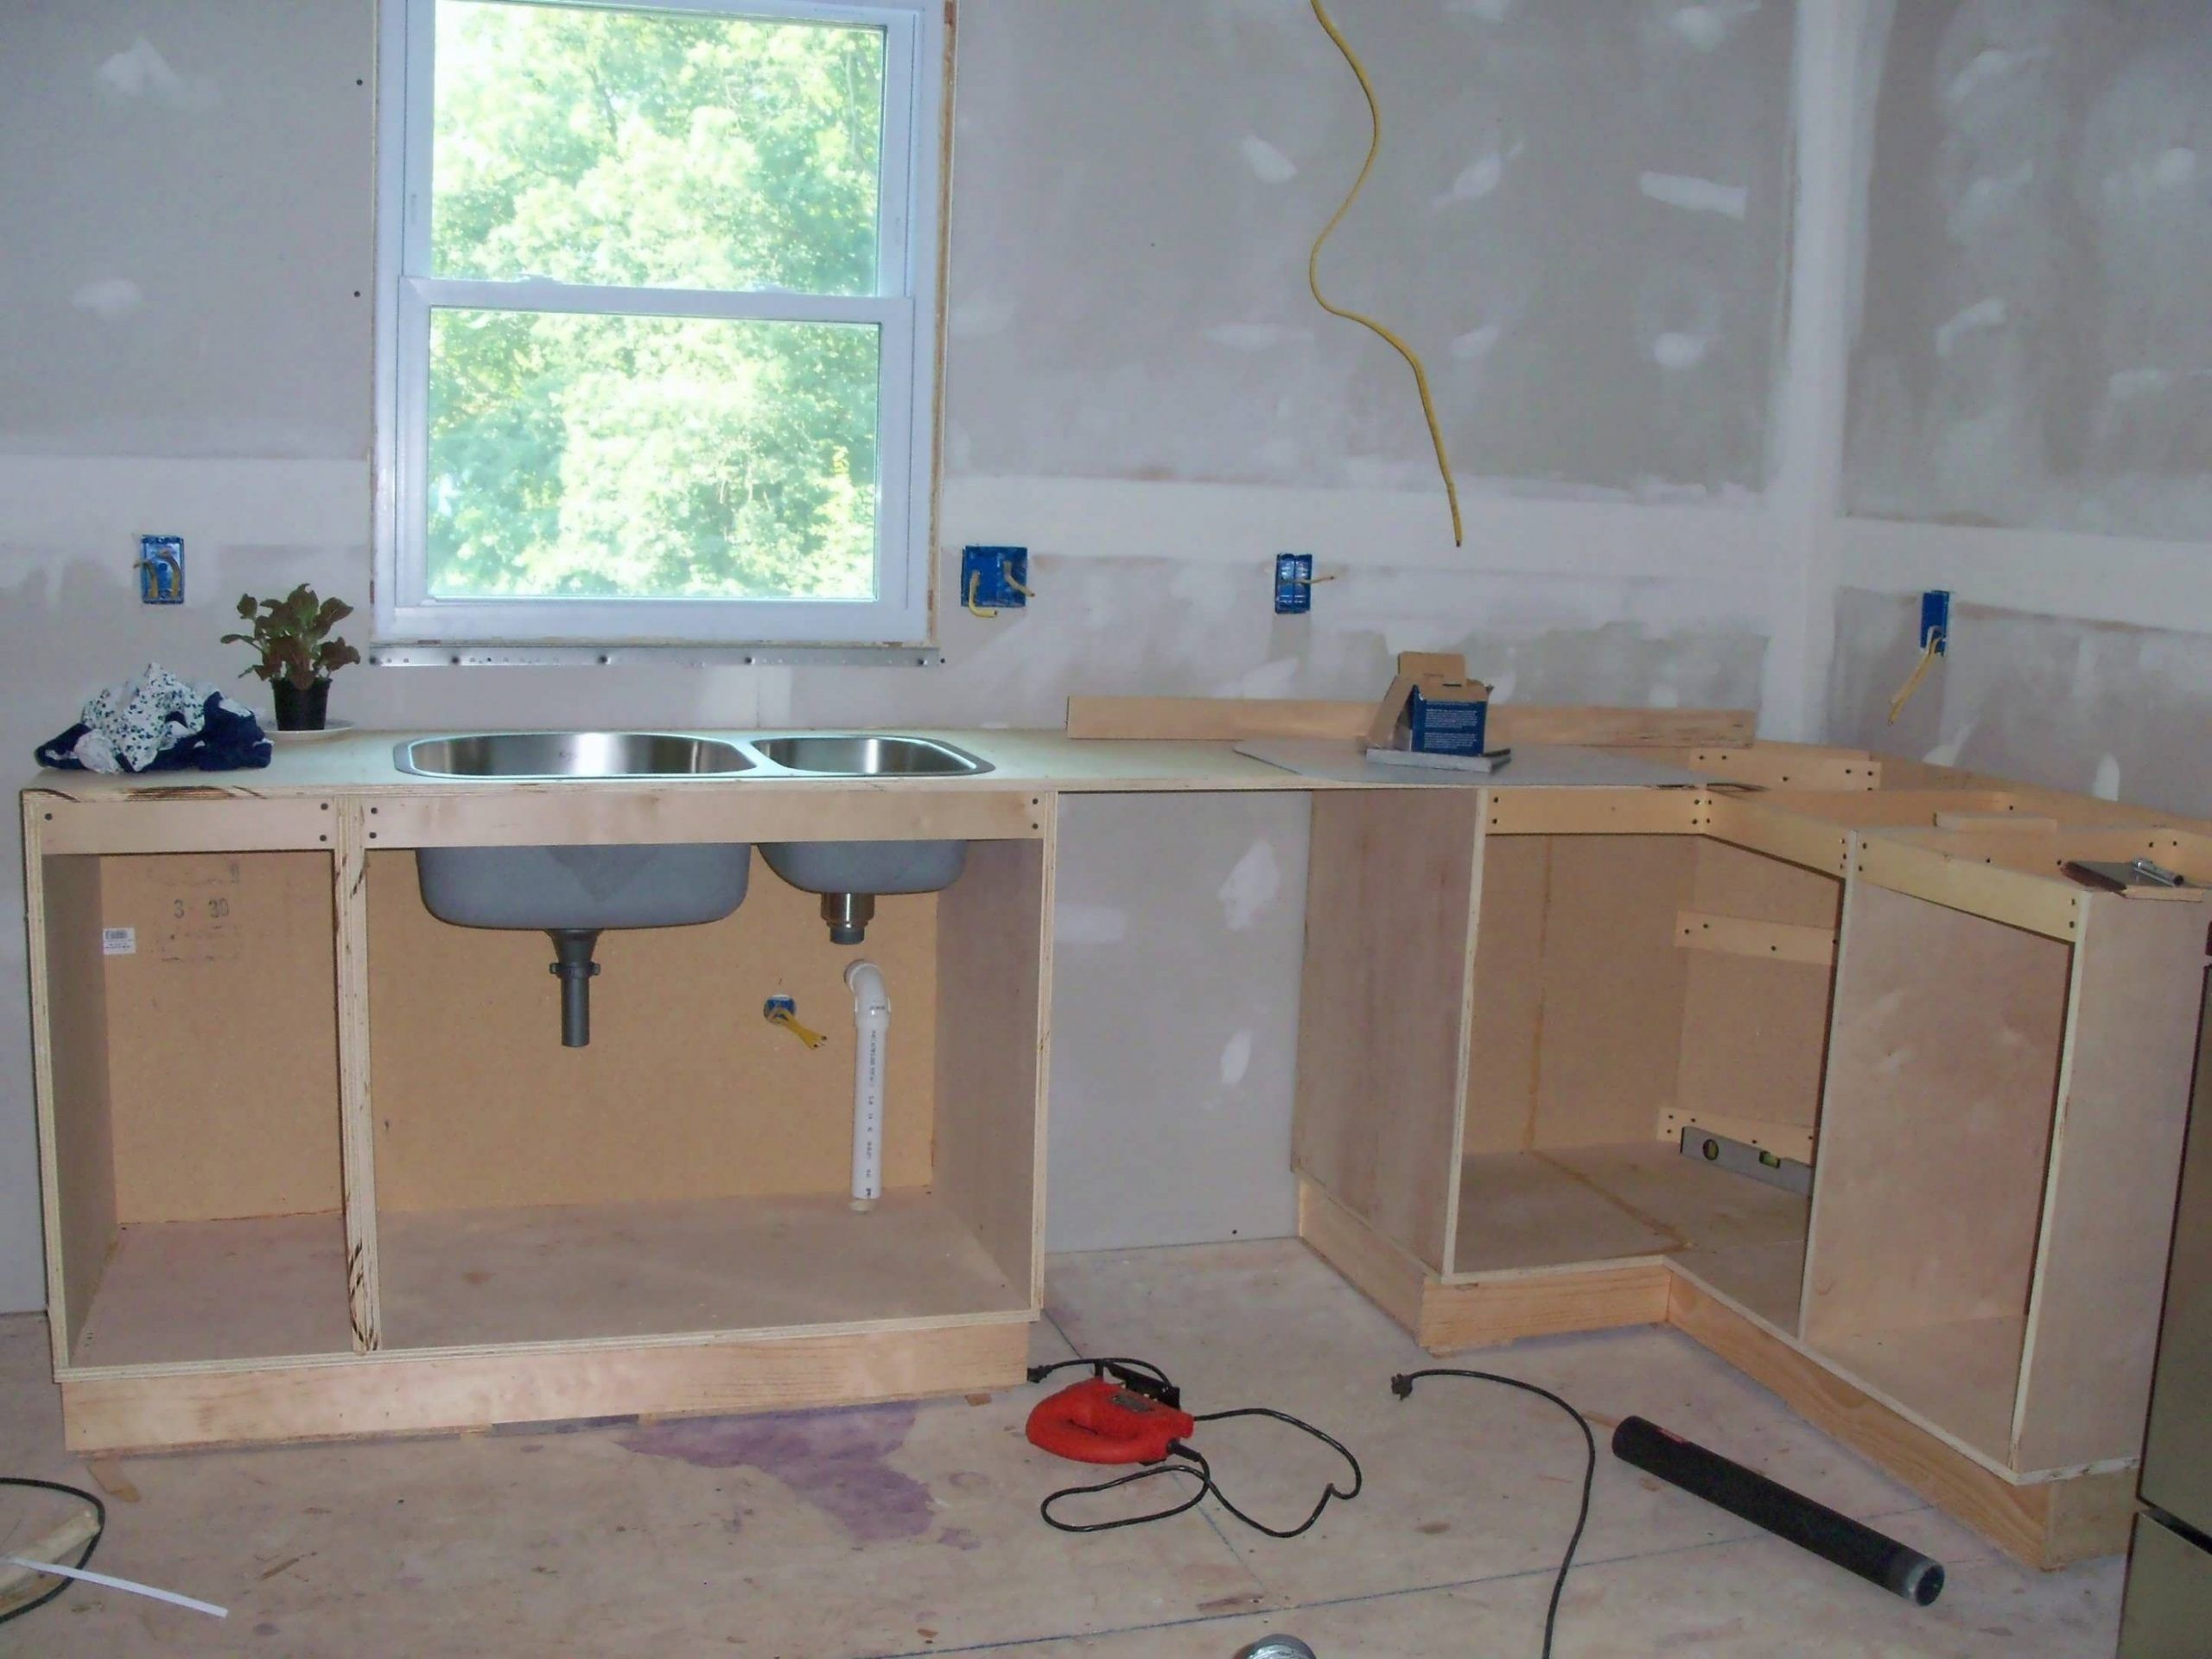 How to Build a Kitchen from Scratch